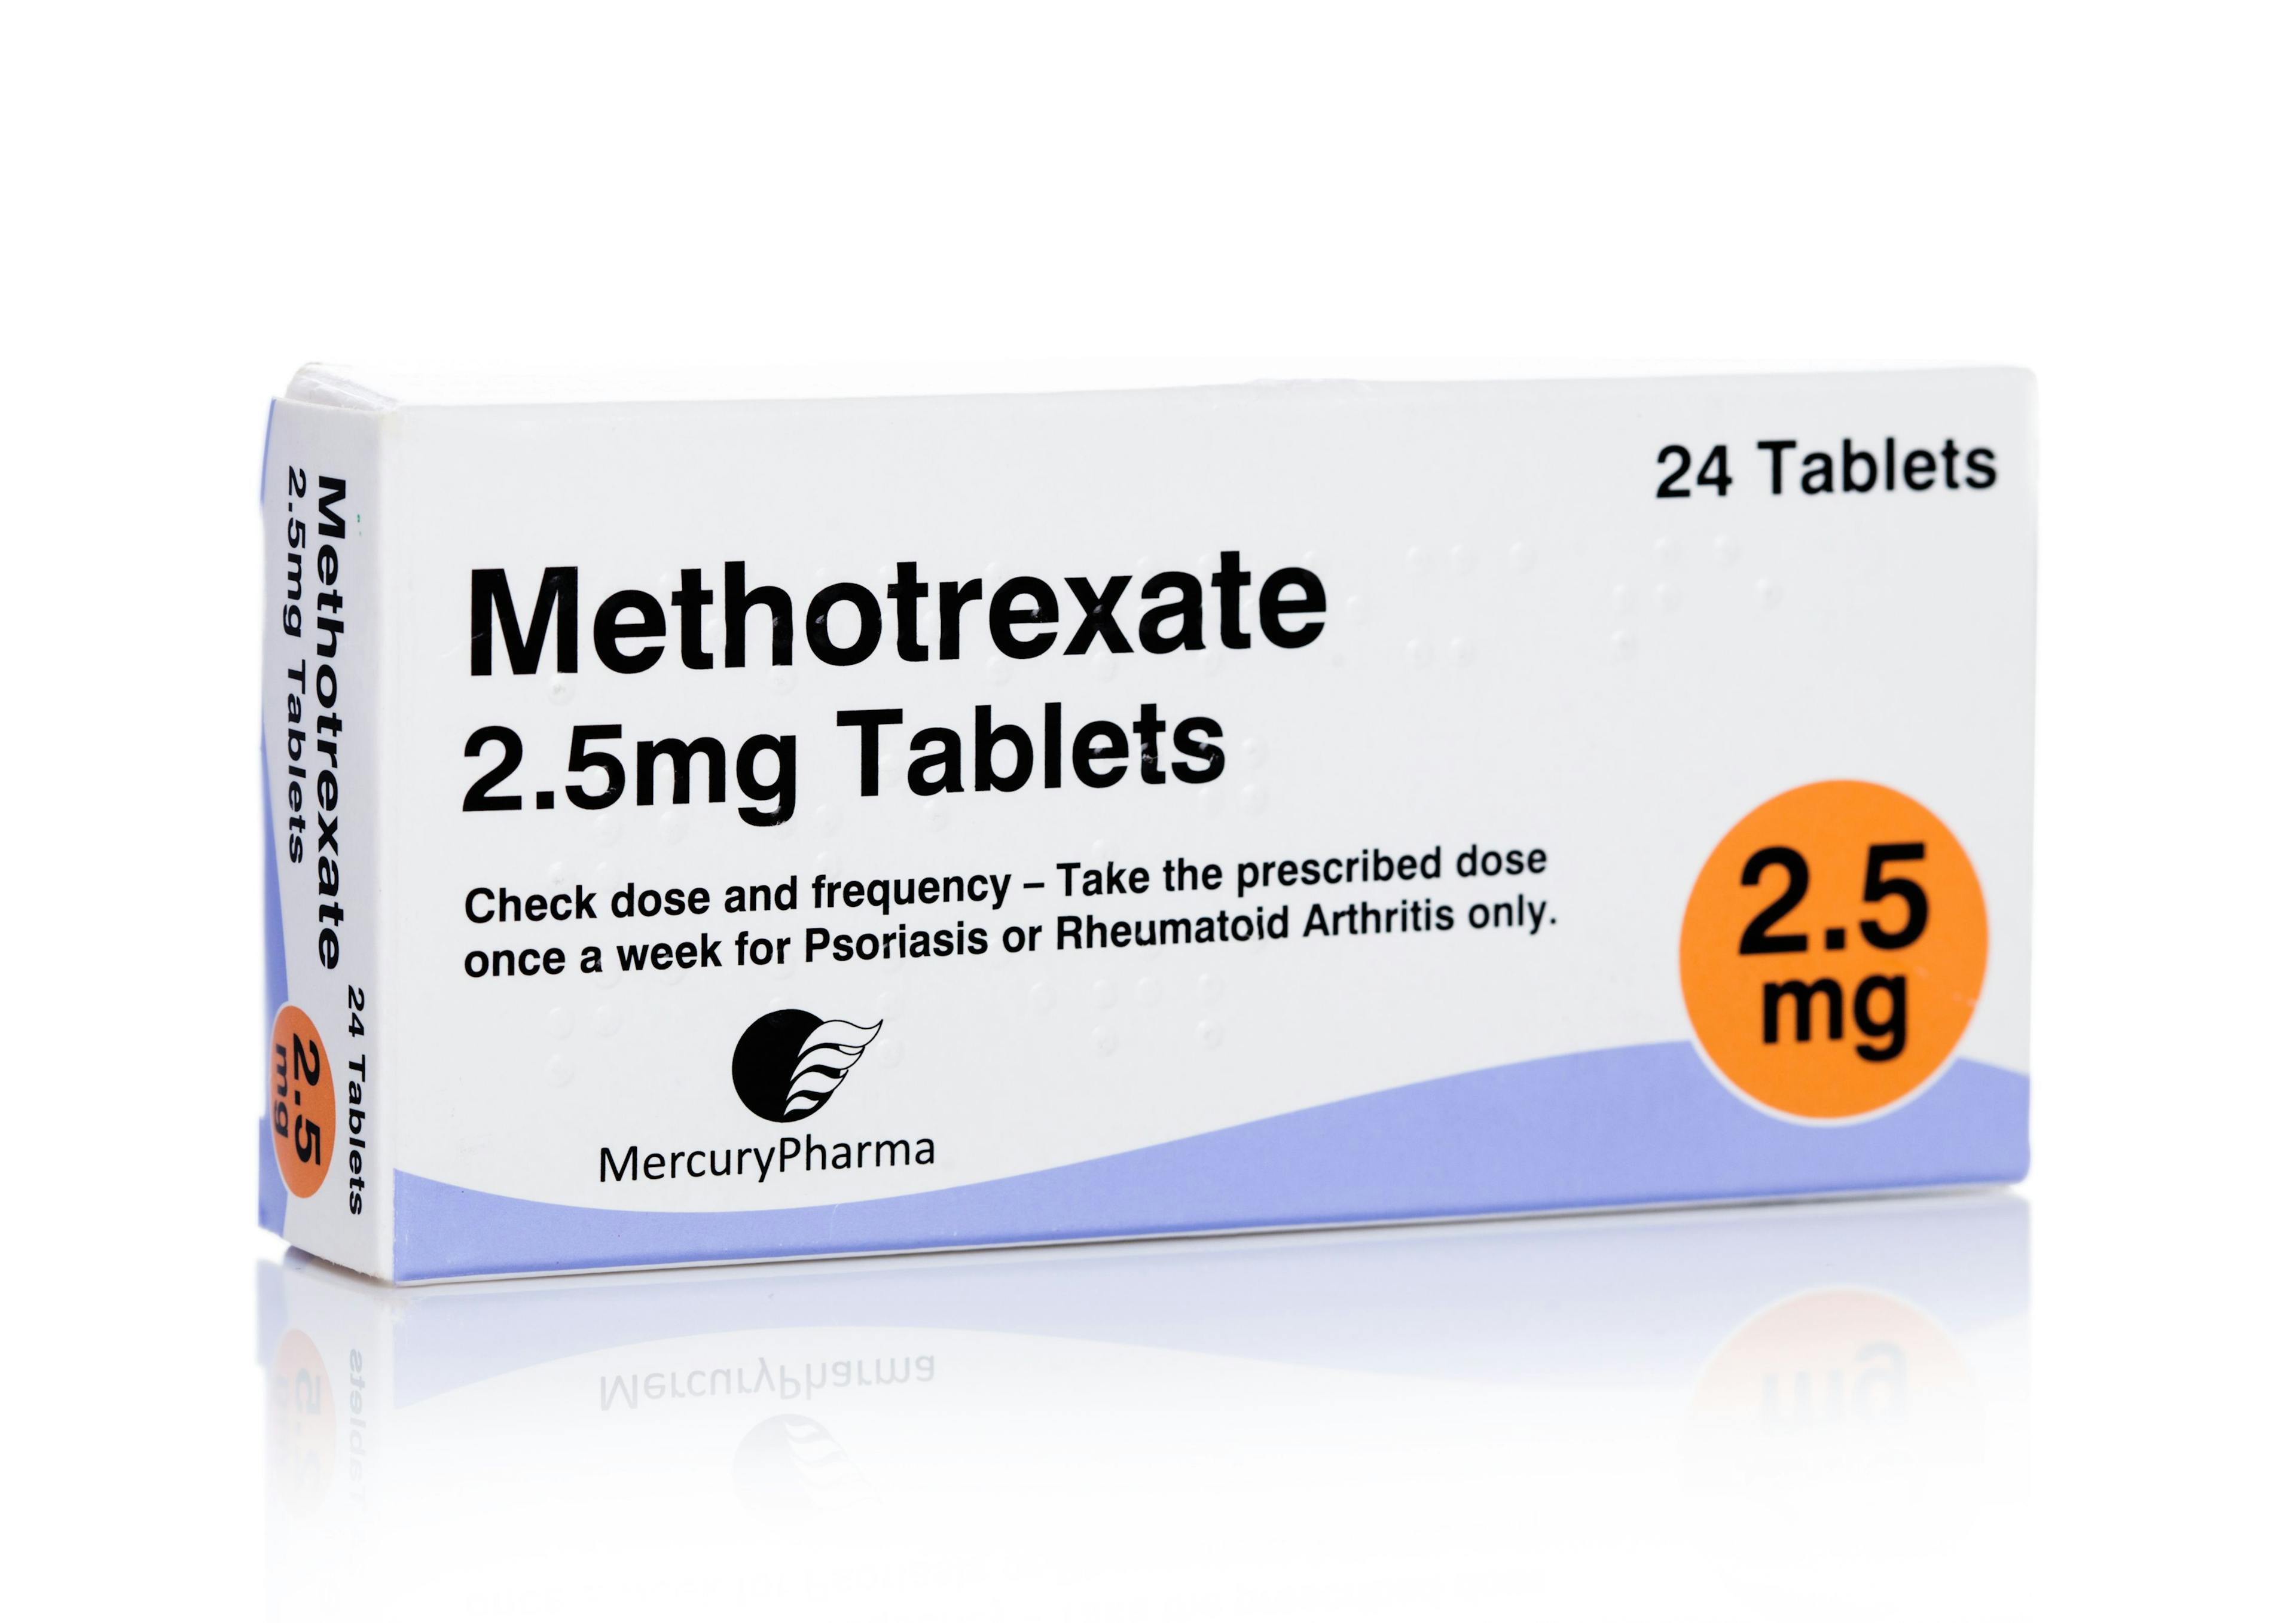 Low-dose Methotrexate May Lower Comorbidity Risk in Rheumatic Disease